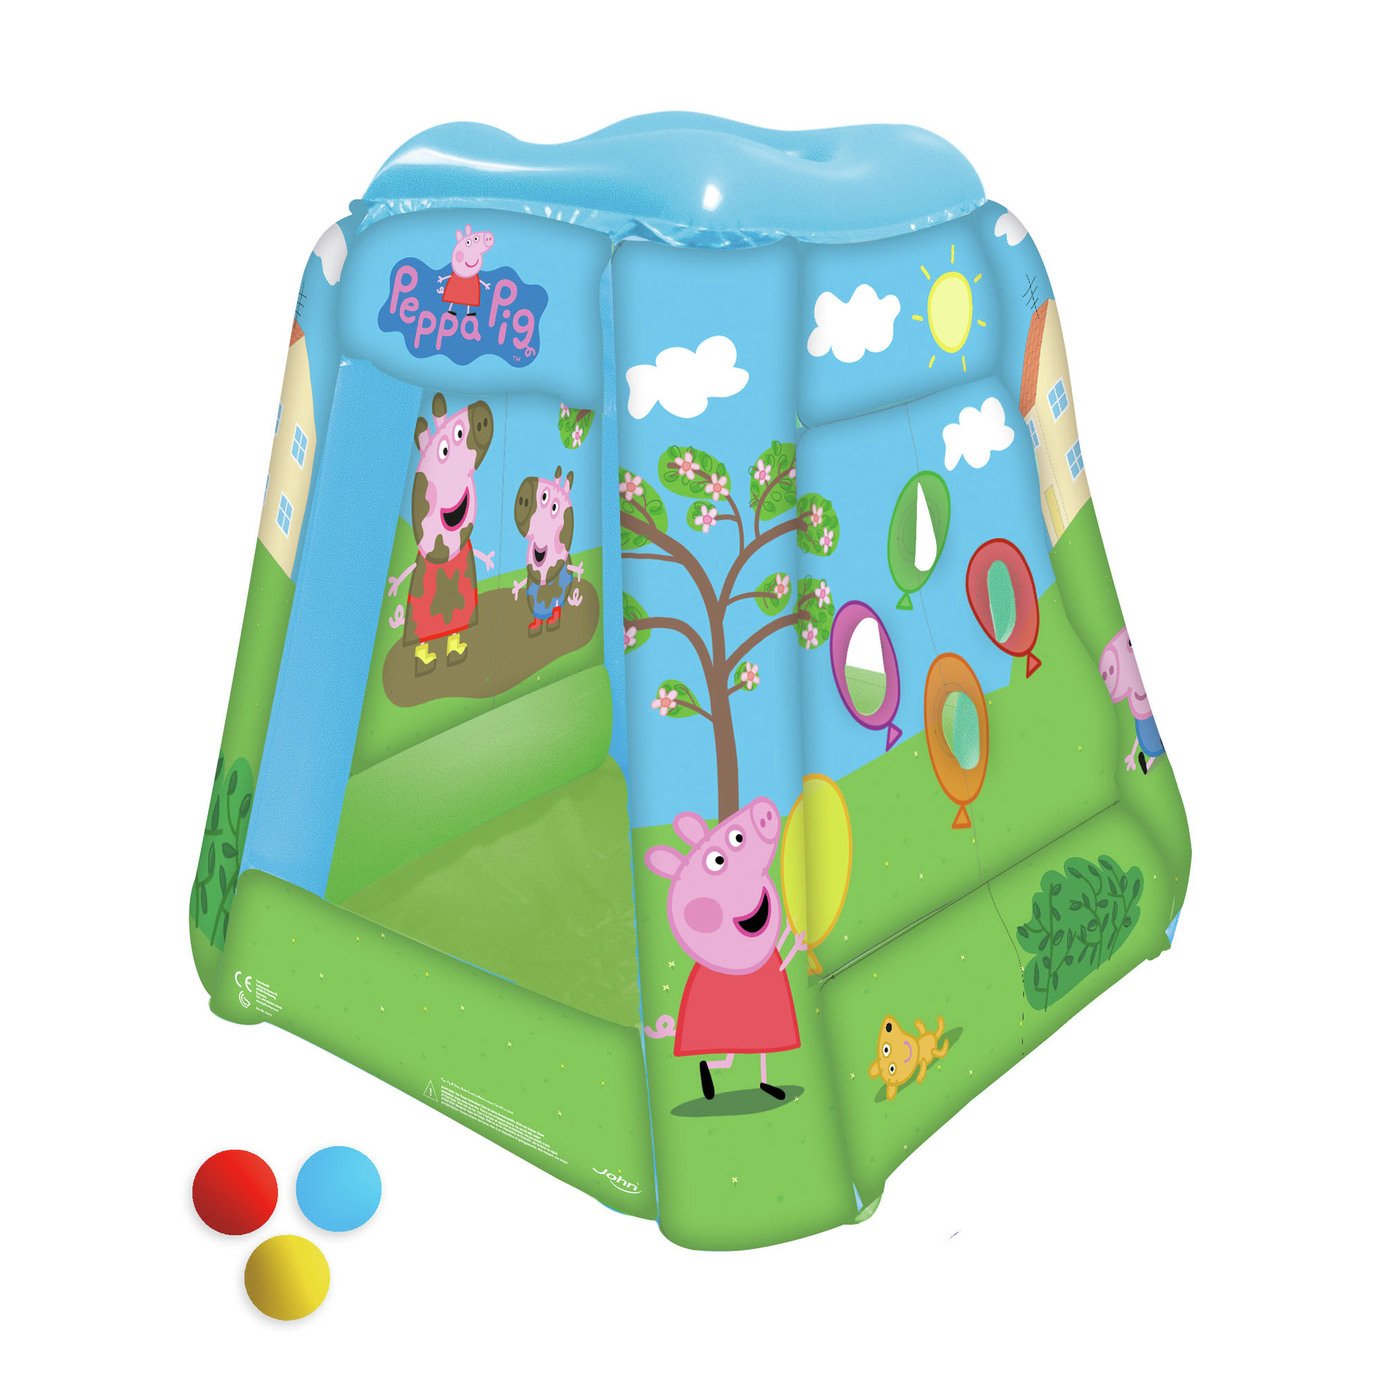 Peppa Pig Inflatable Ball Pit with 20 Balls review